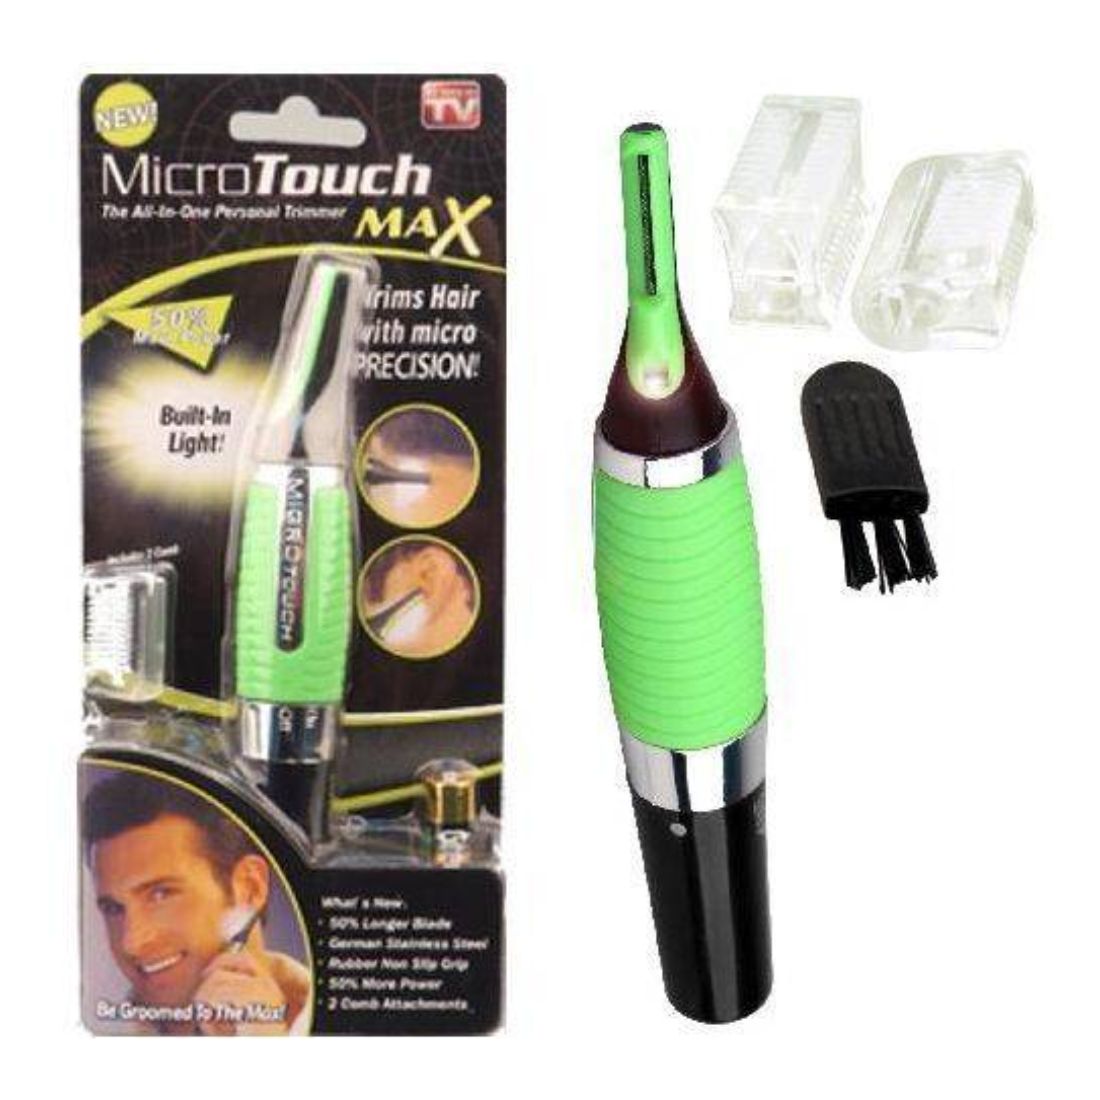 Micro Touch Max Hair Remover, As Seen On TV, Precision Hair Removal Device with Built-in Light